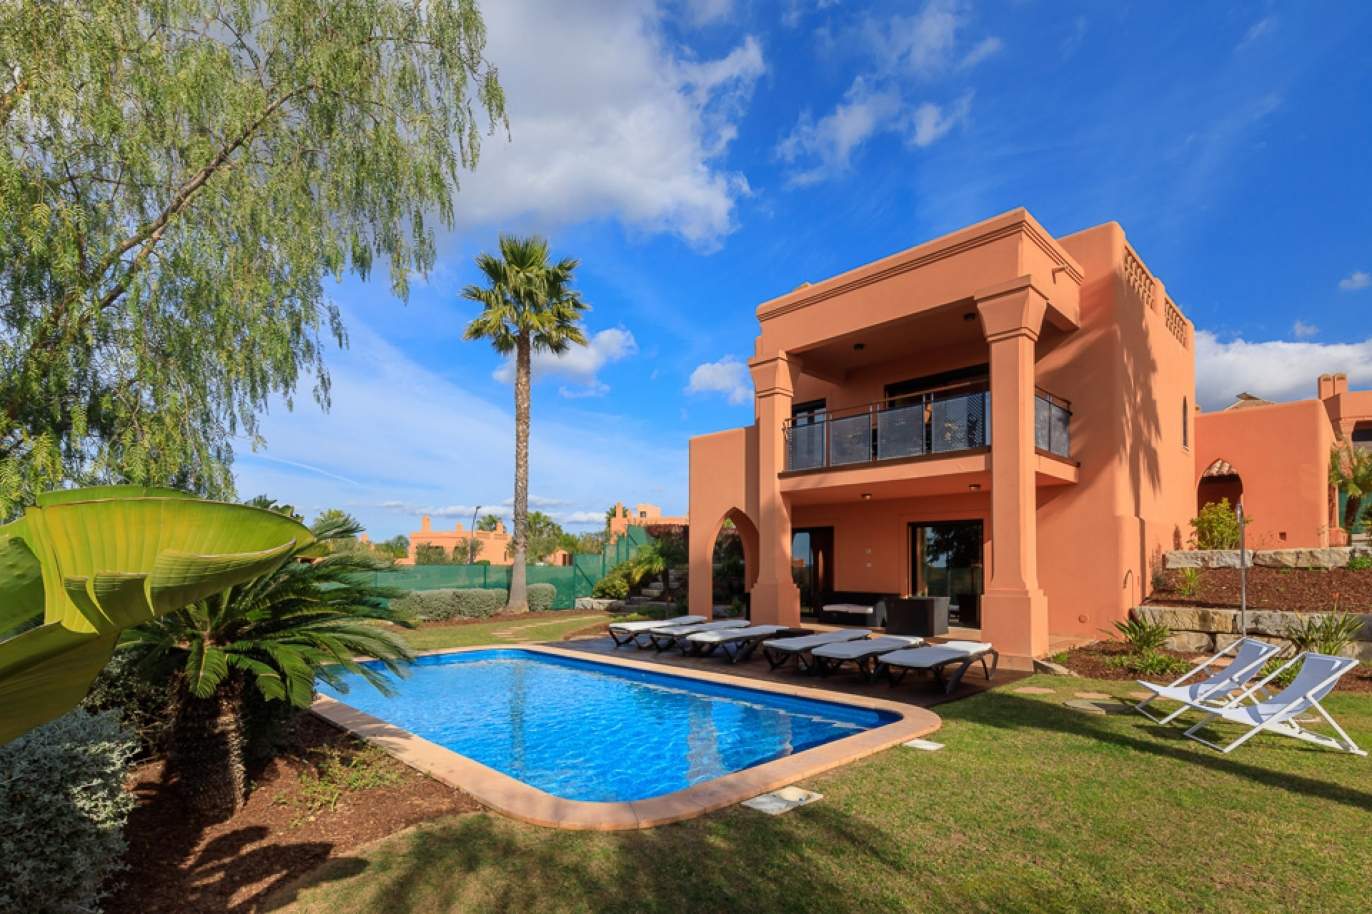 Sale of detached villa with private pool in Central Algarve, Portugal_139266